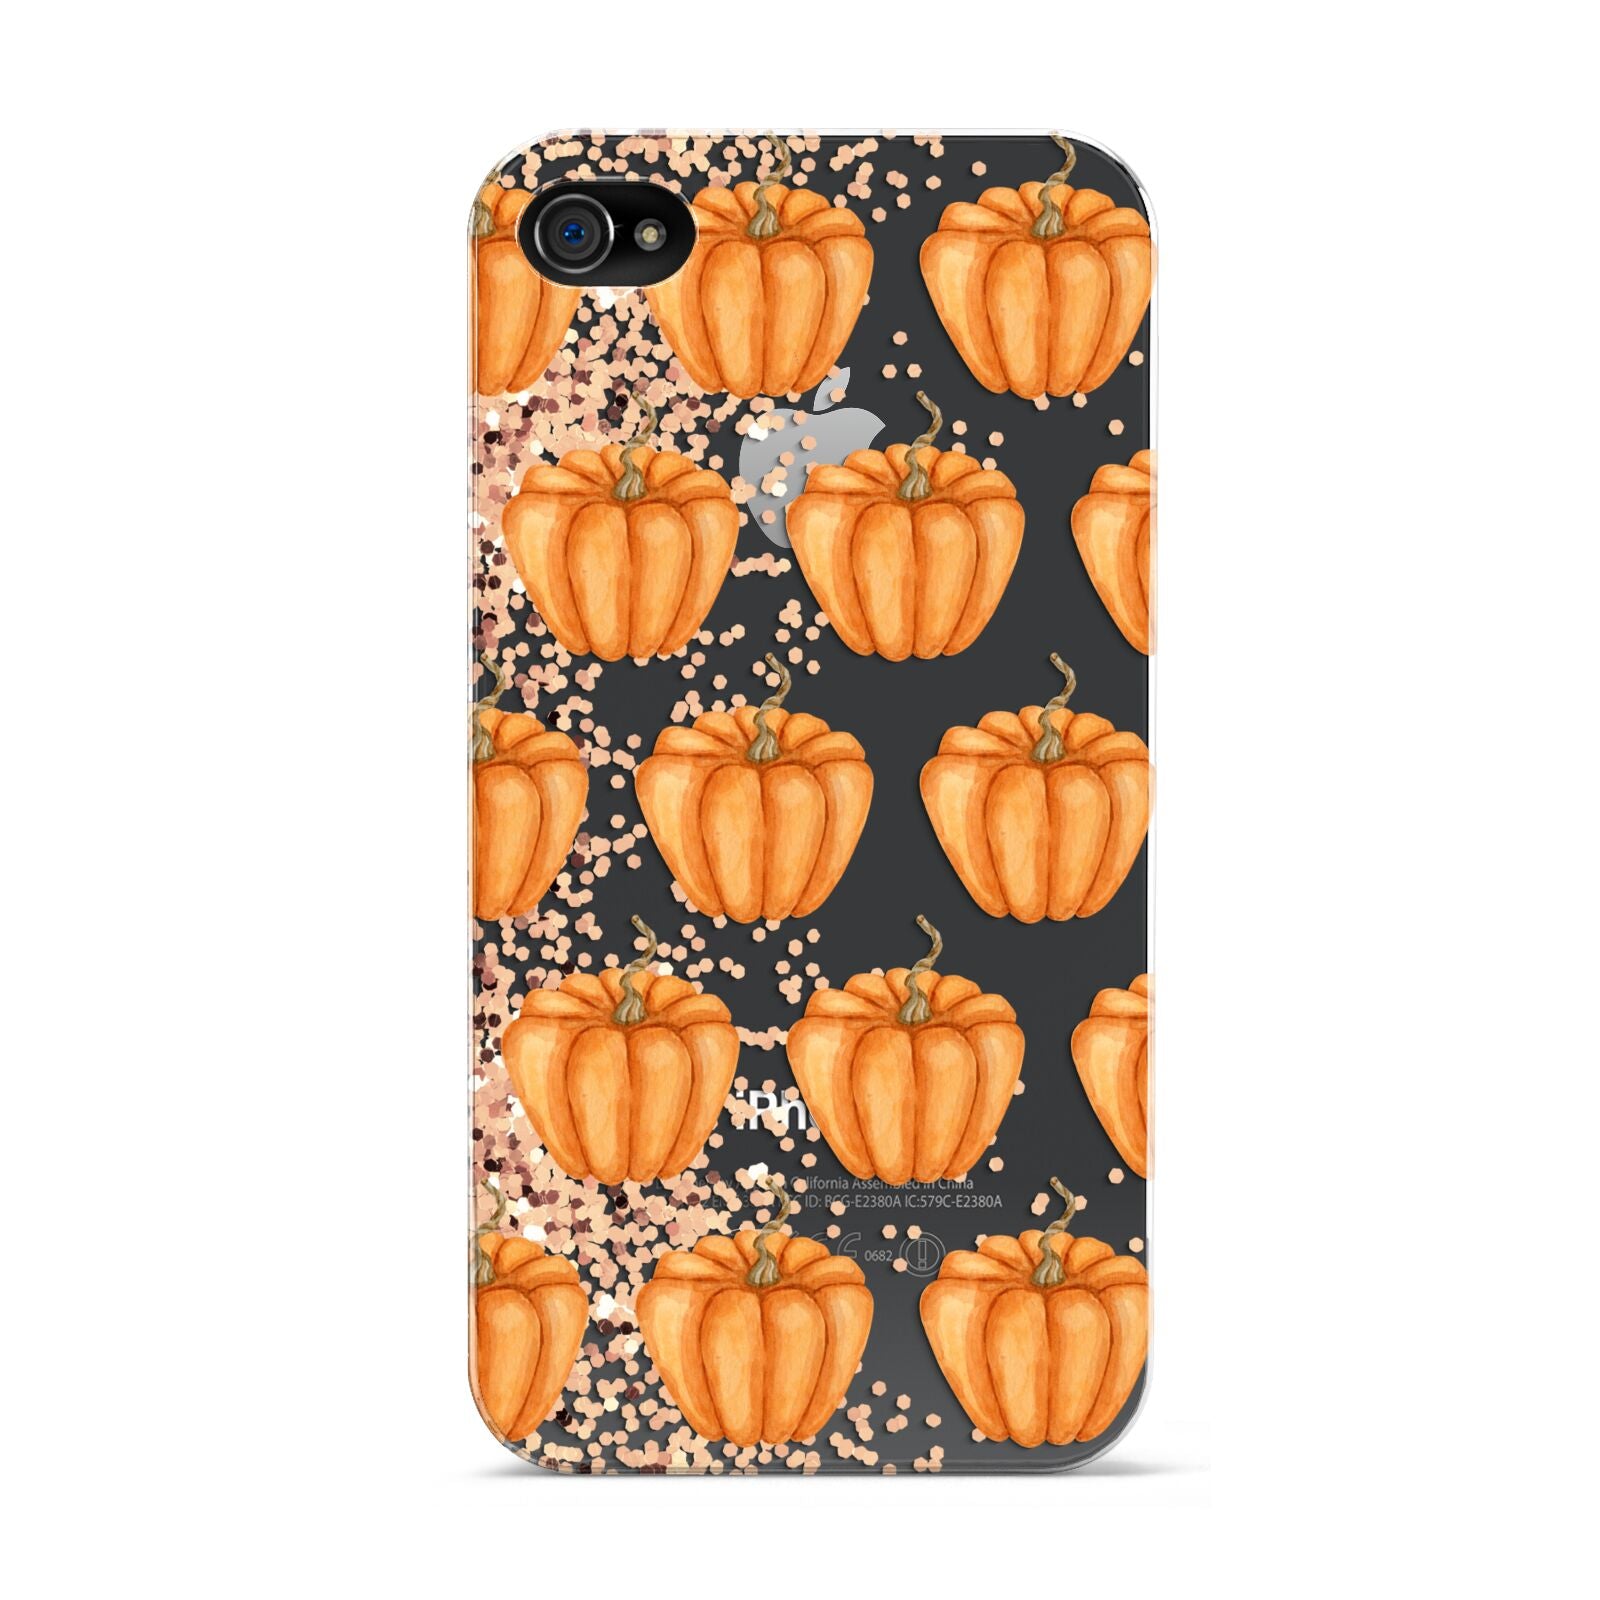 Shimmery Pumpkins Apple iPhone 4s Case